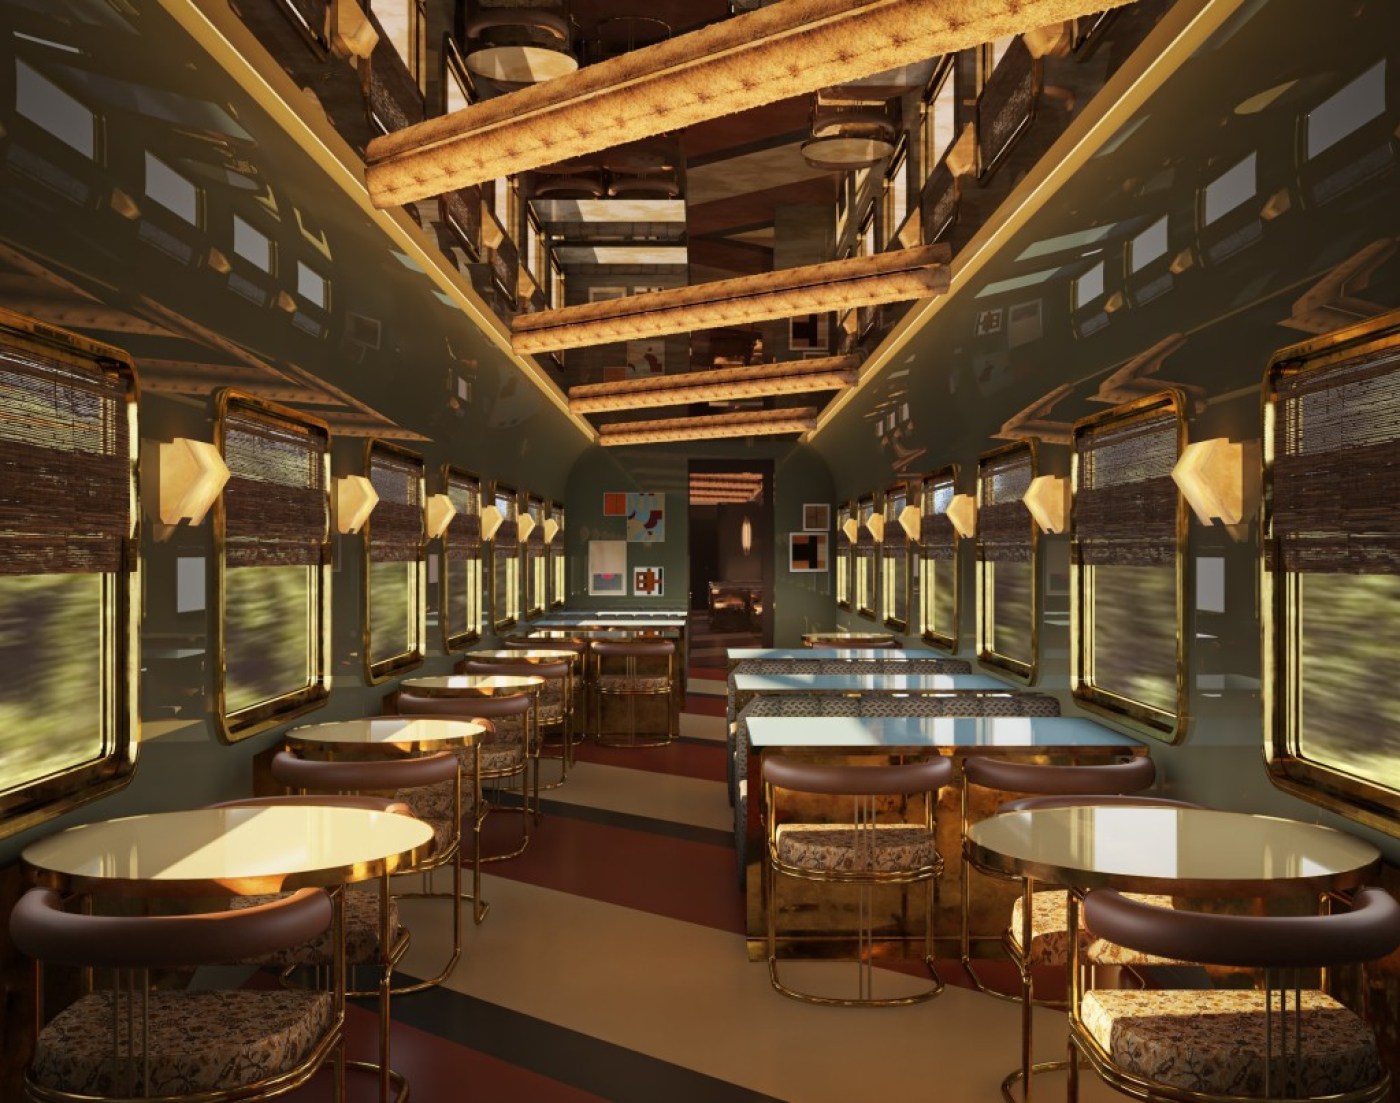 the dining space Orient Express